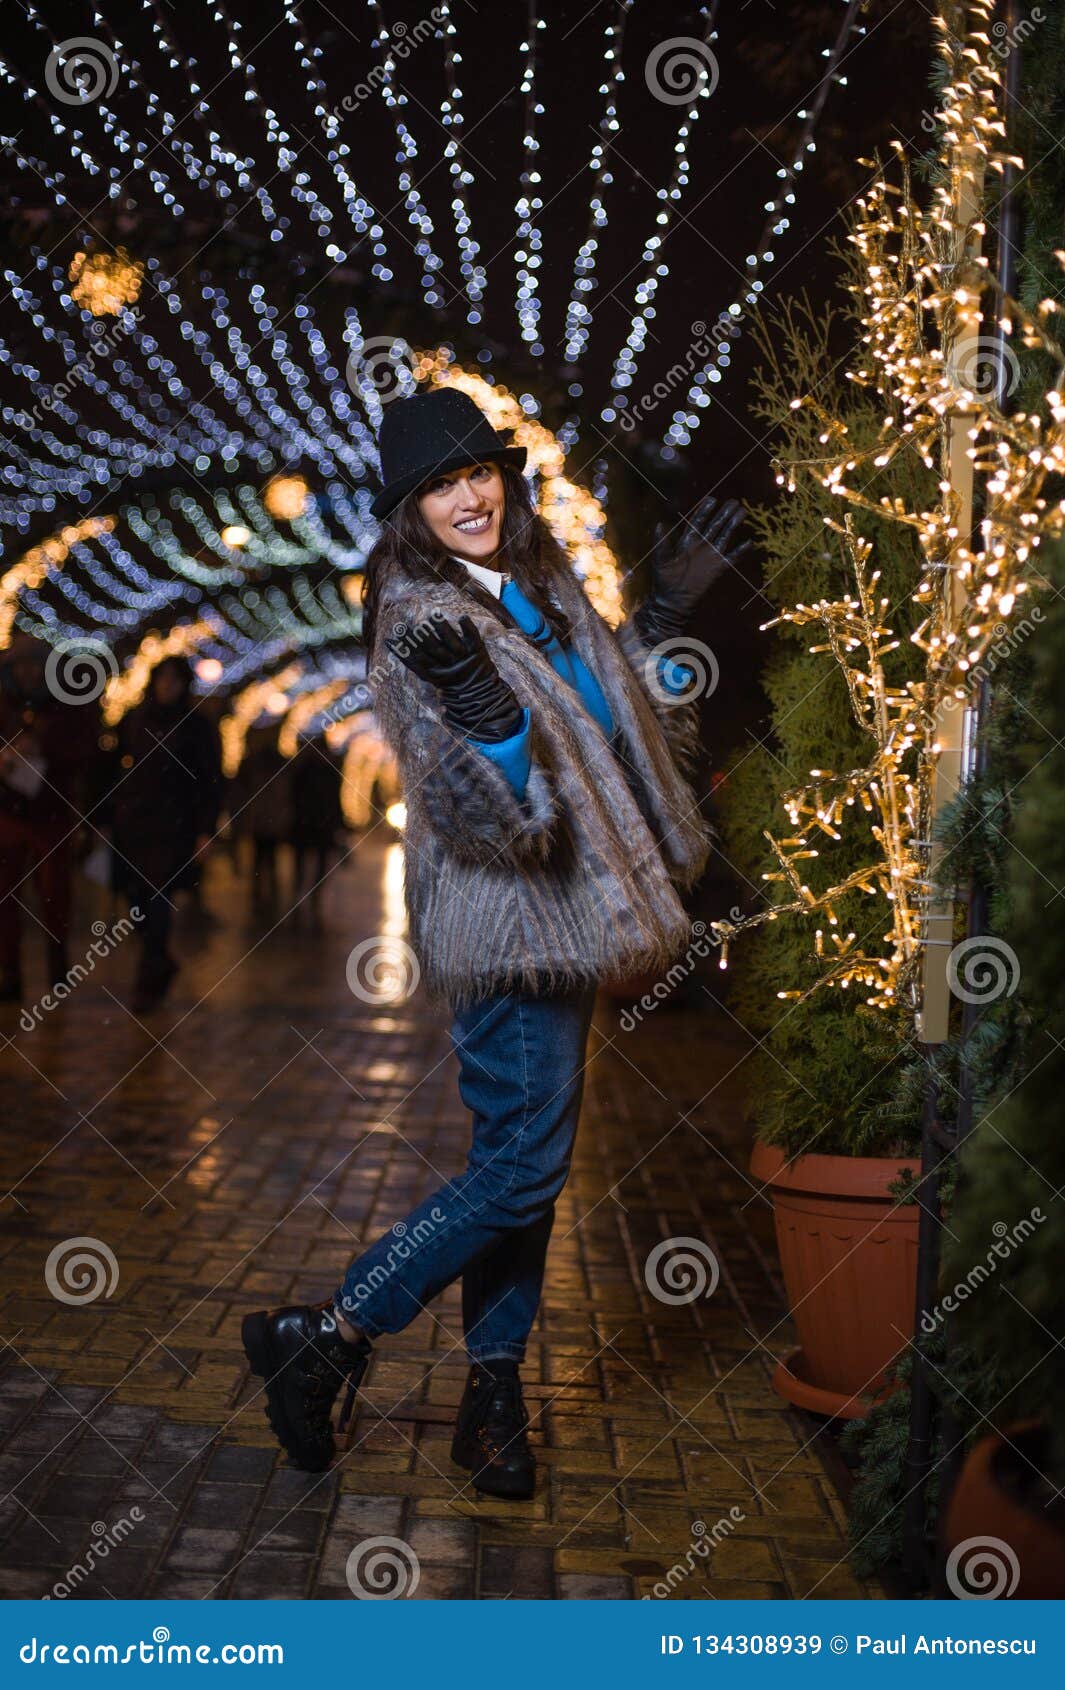 Happy Girl Posing with Winter Lights in the Background. Stock Image - Image  of city, evening: 134308939